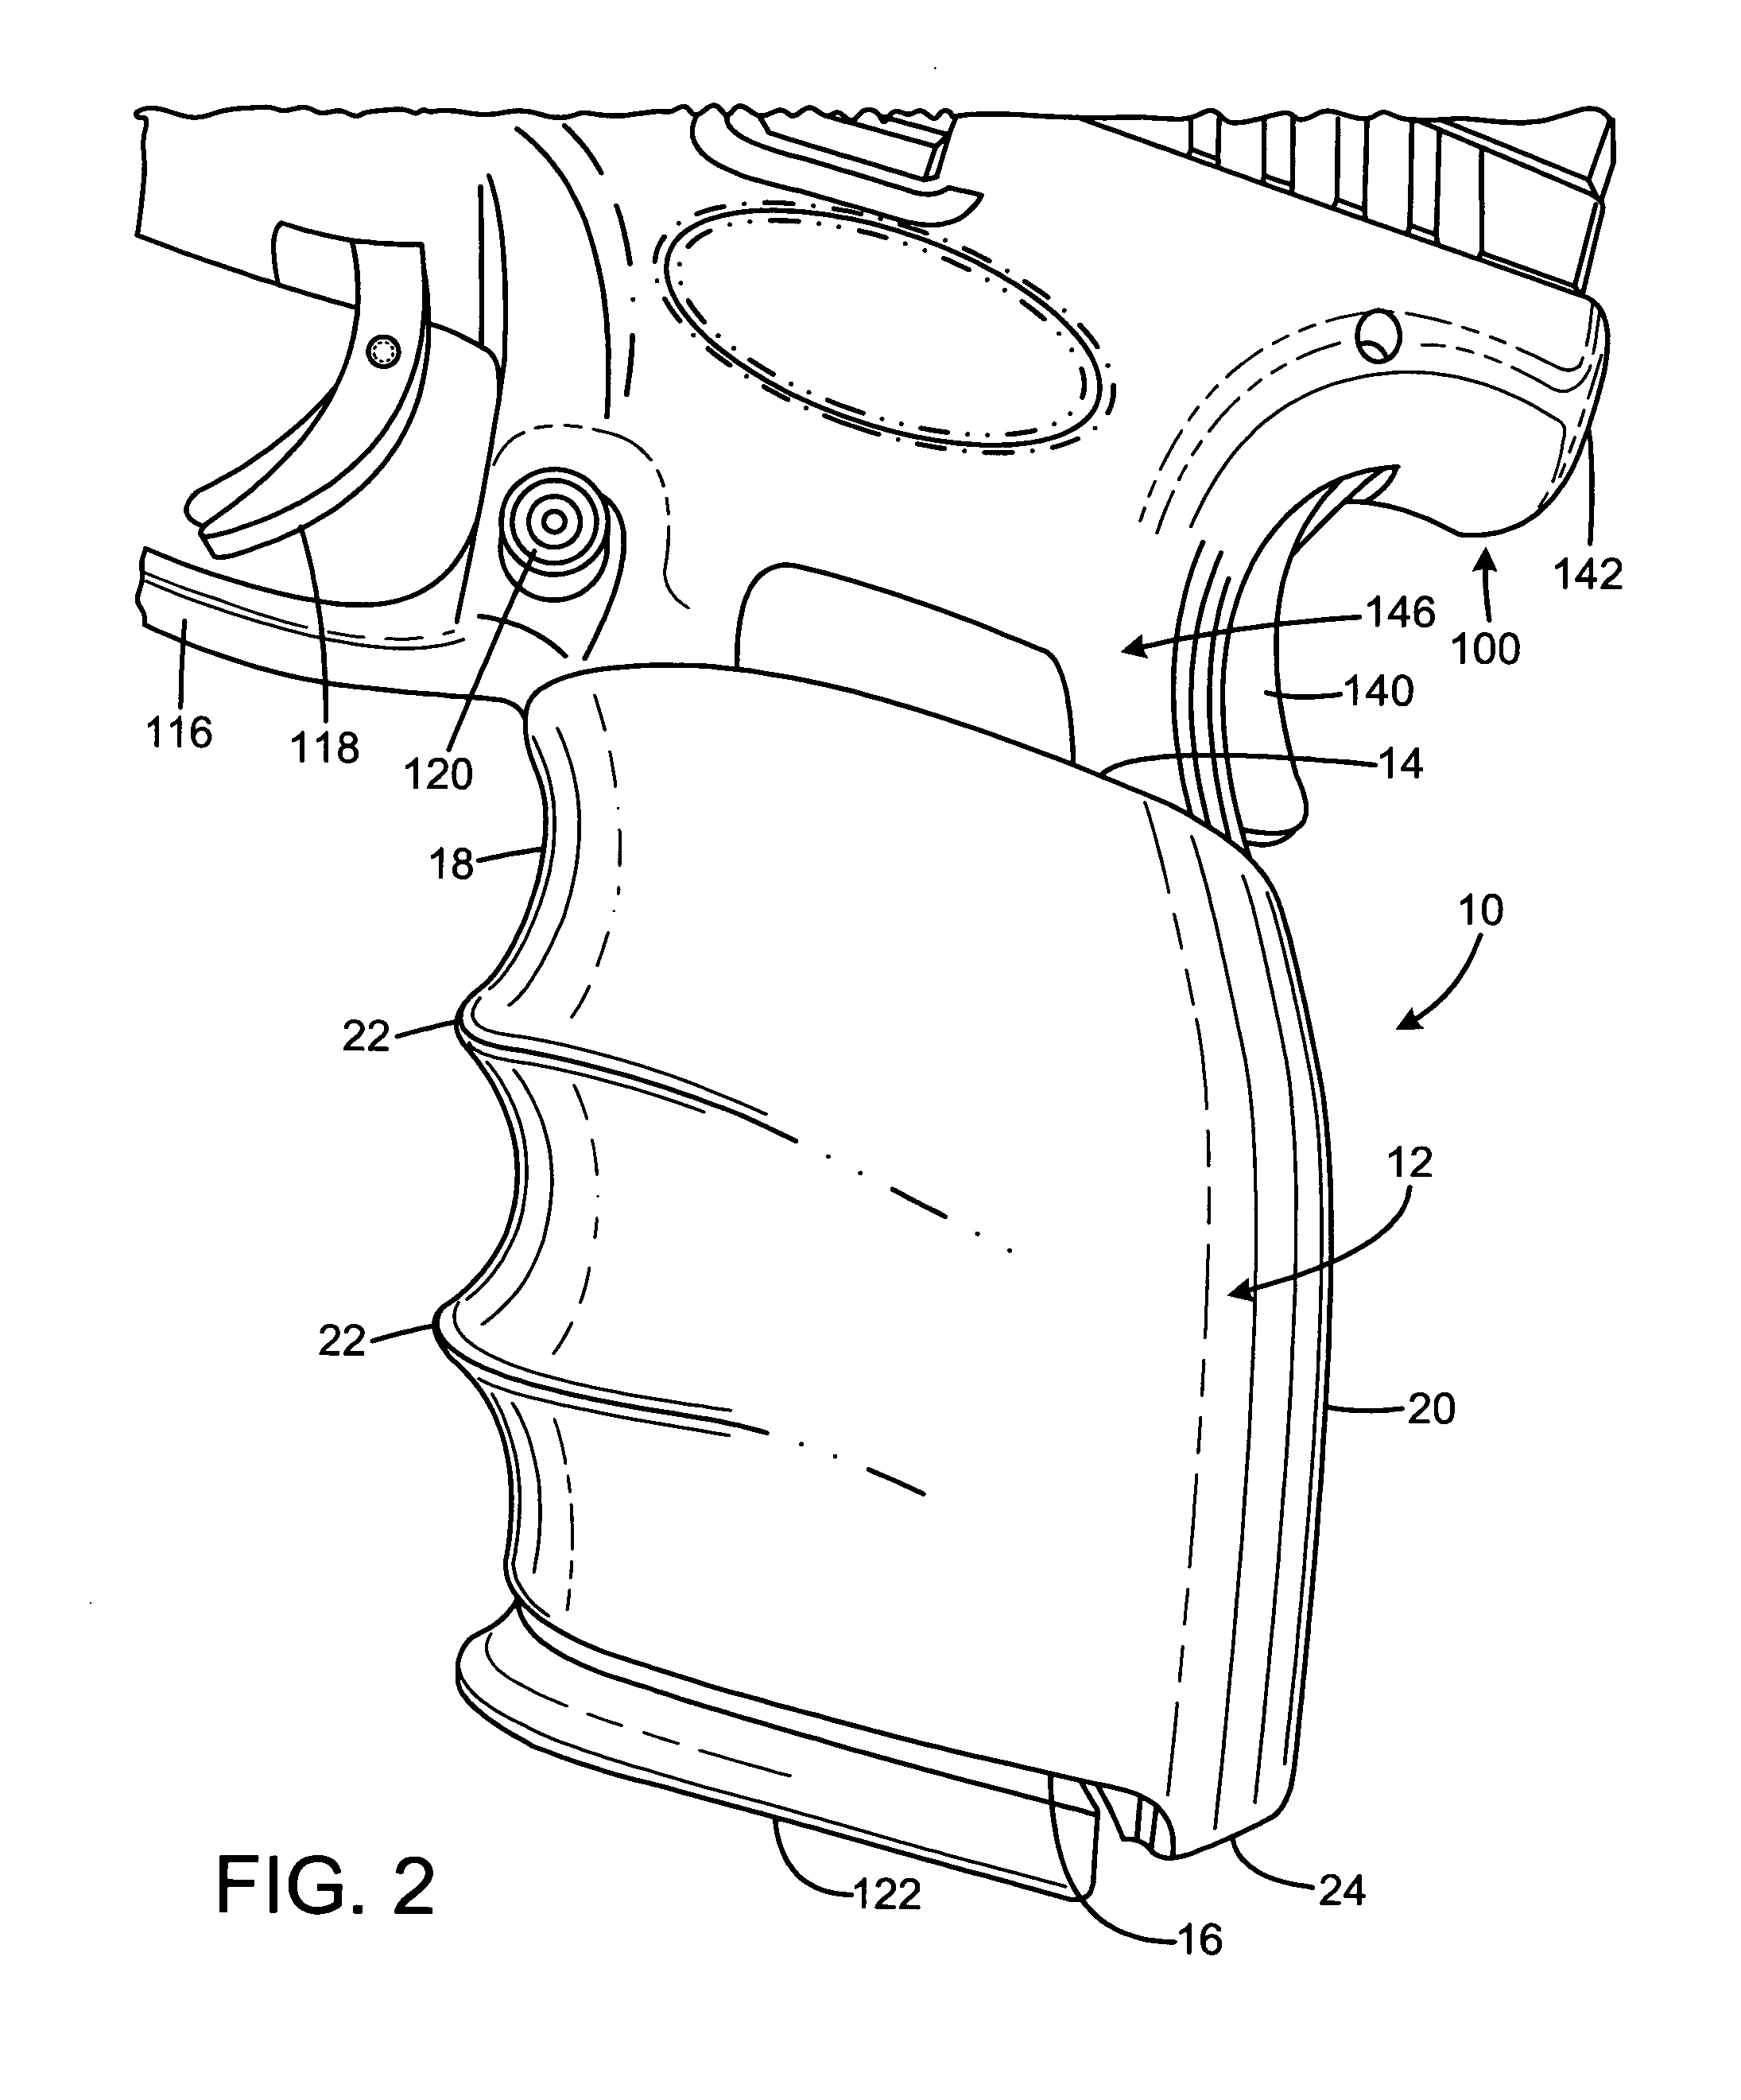 Firearm grip sleeve with retention feature